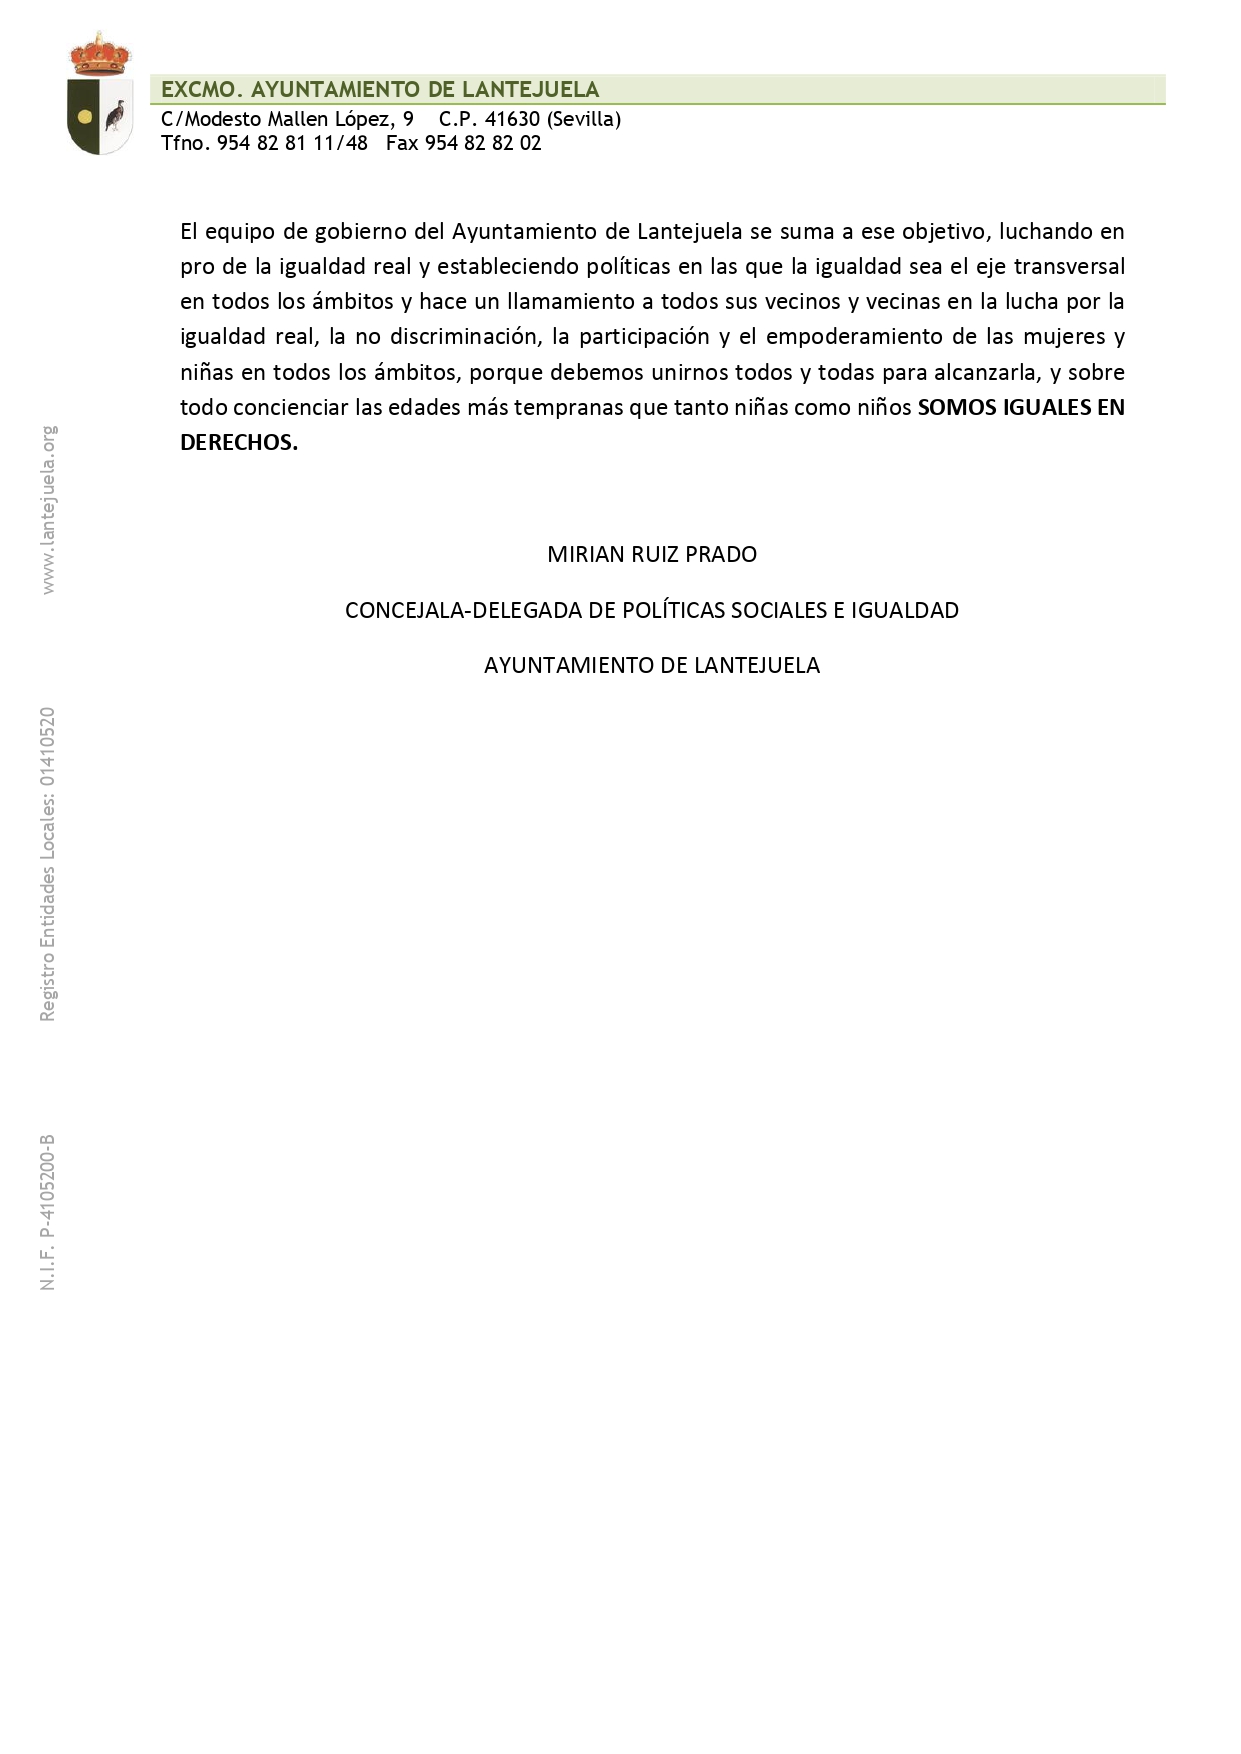 MANIFIESTO 8 MARZO 2020_pages-to-jpg-0002